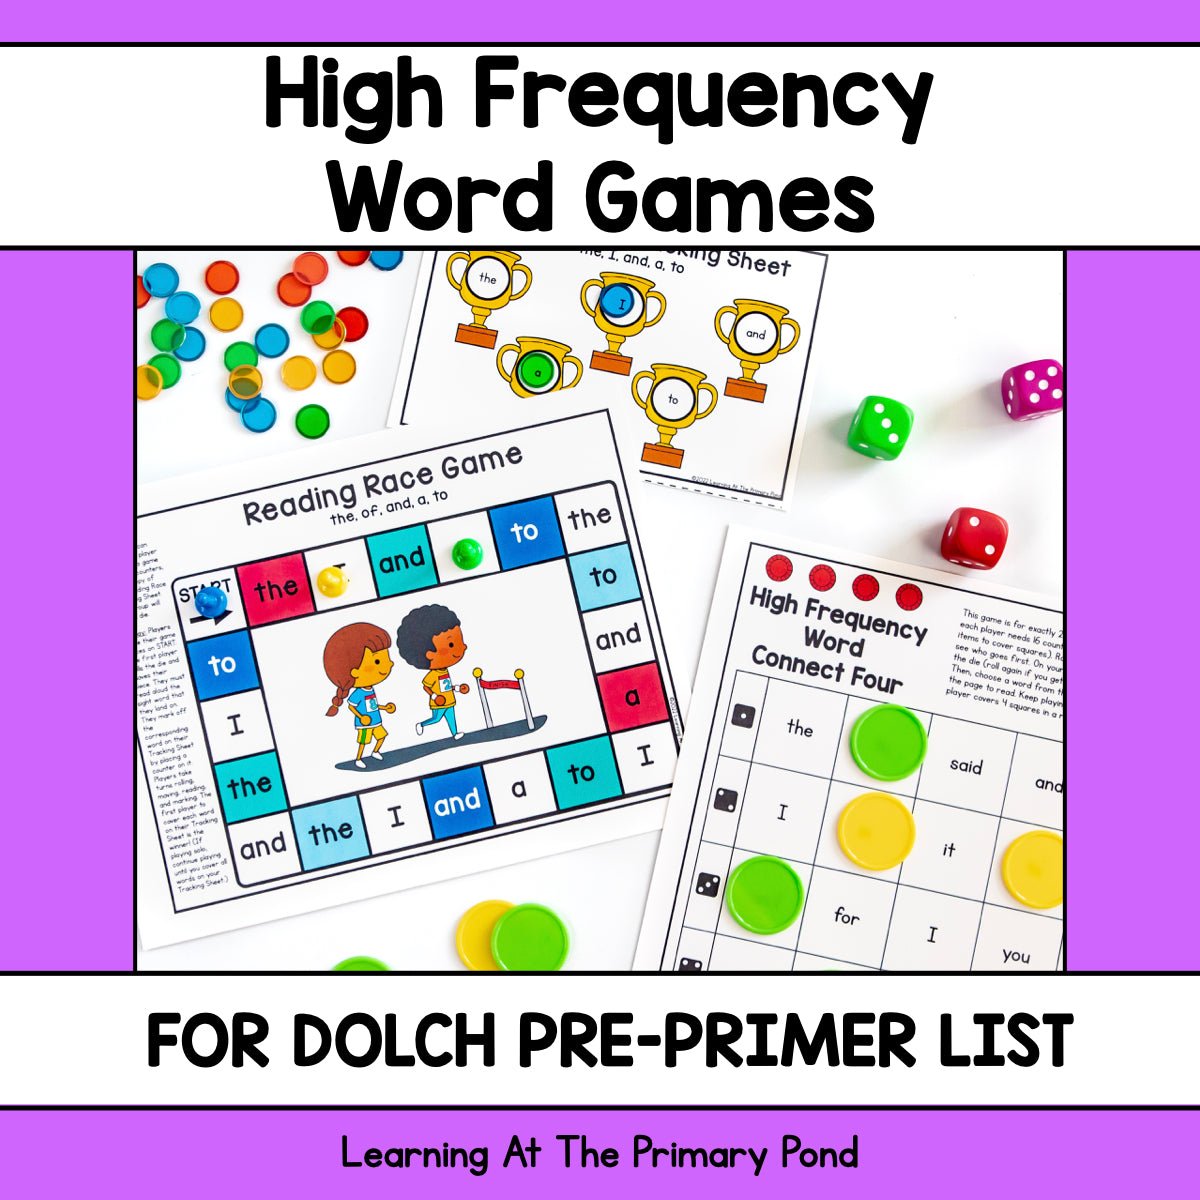 High Frequency Word Games | Dolch Pre-Primer Words - learning-at-the-primary-pond